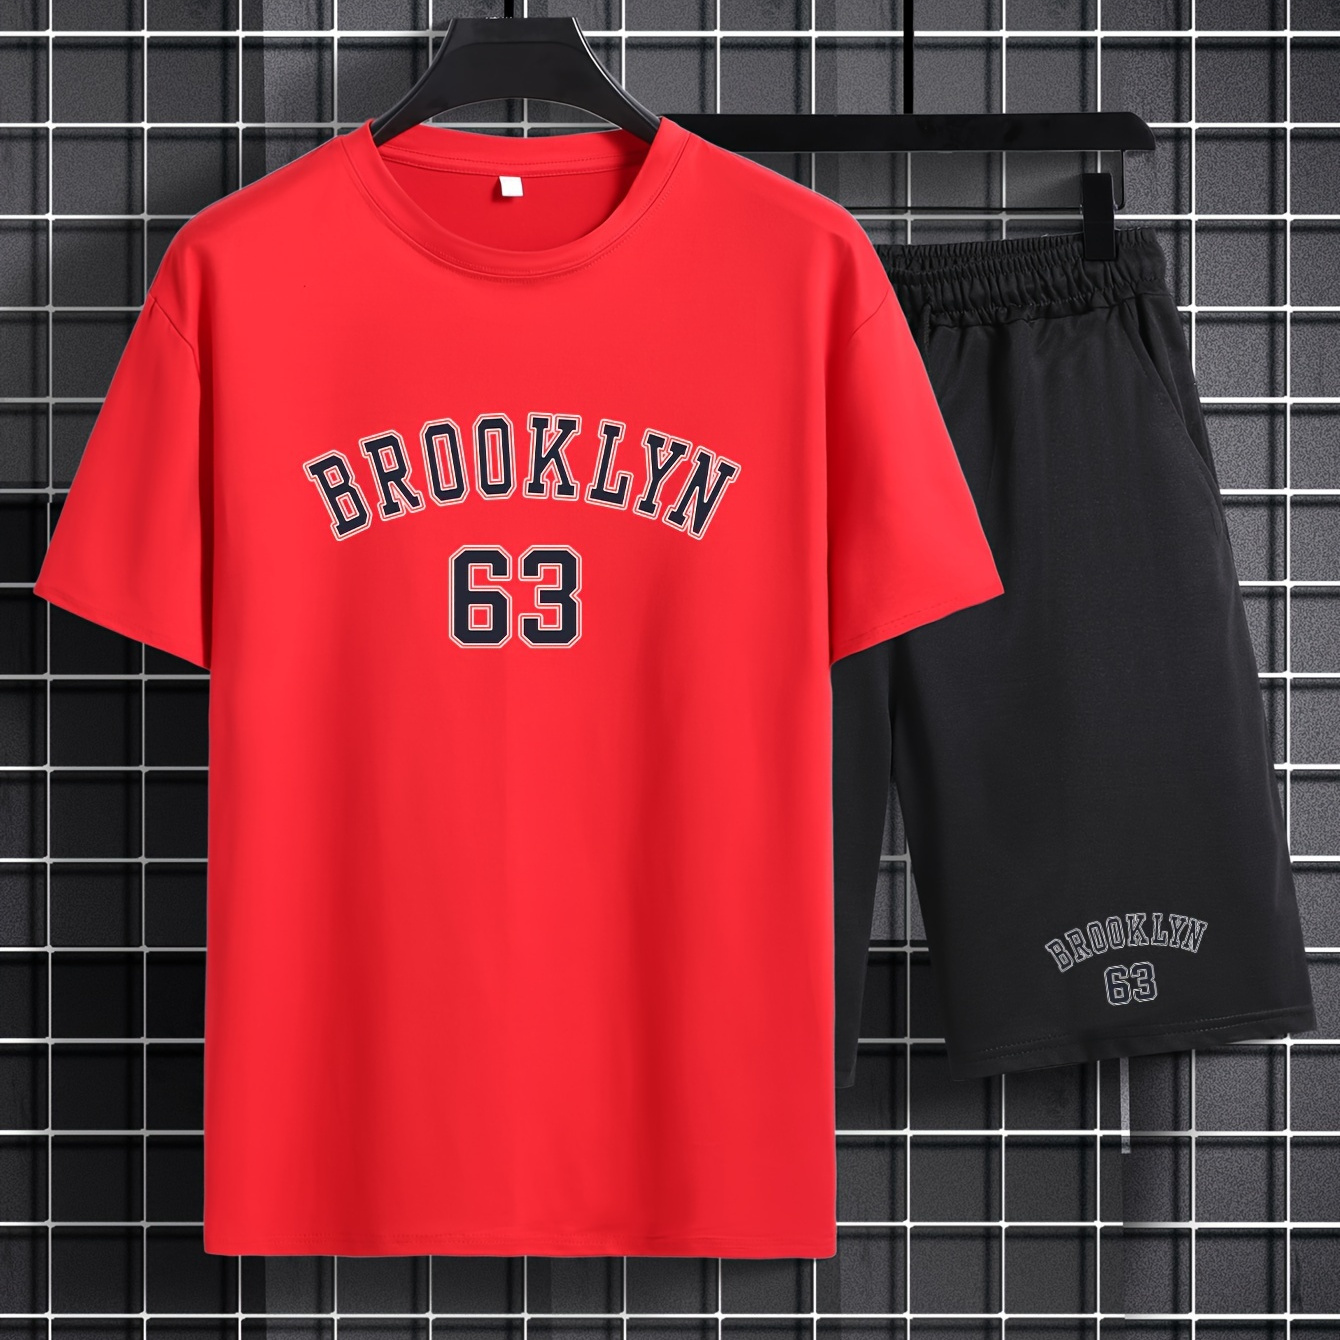 

Plus Size Men's 2pcs Outfits, "brooklyn" Graphic Print T-shirt & Shorts Set For Outdoor Sports